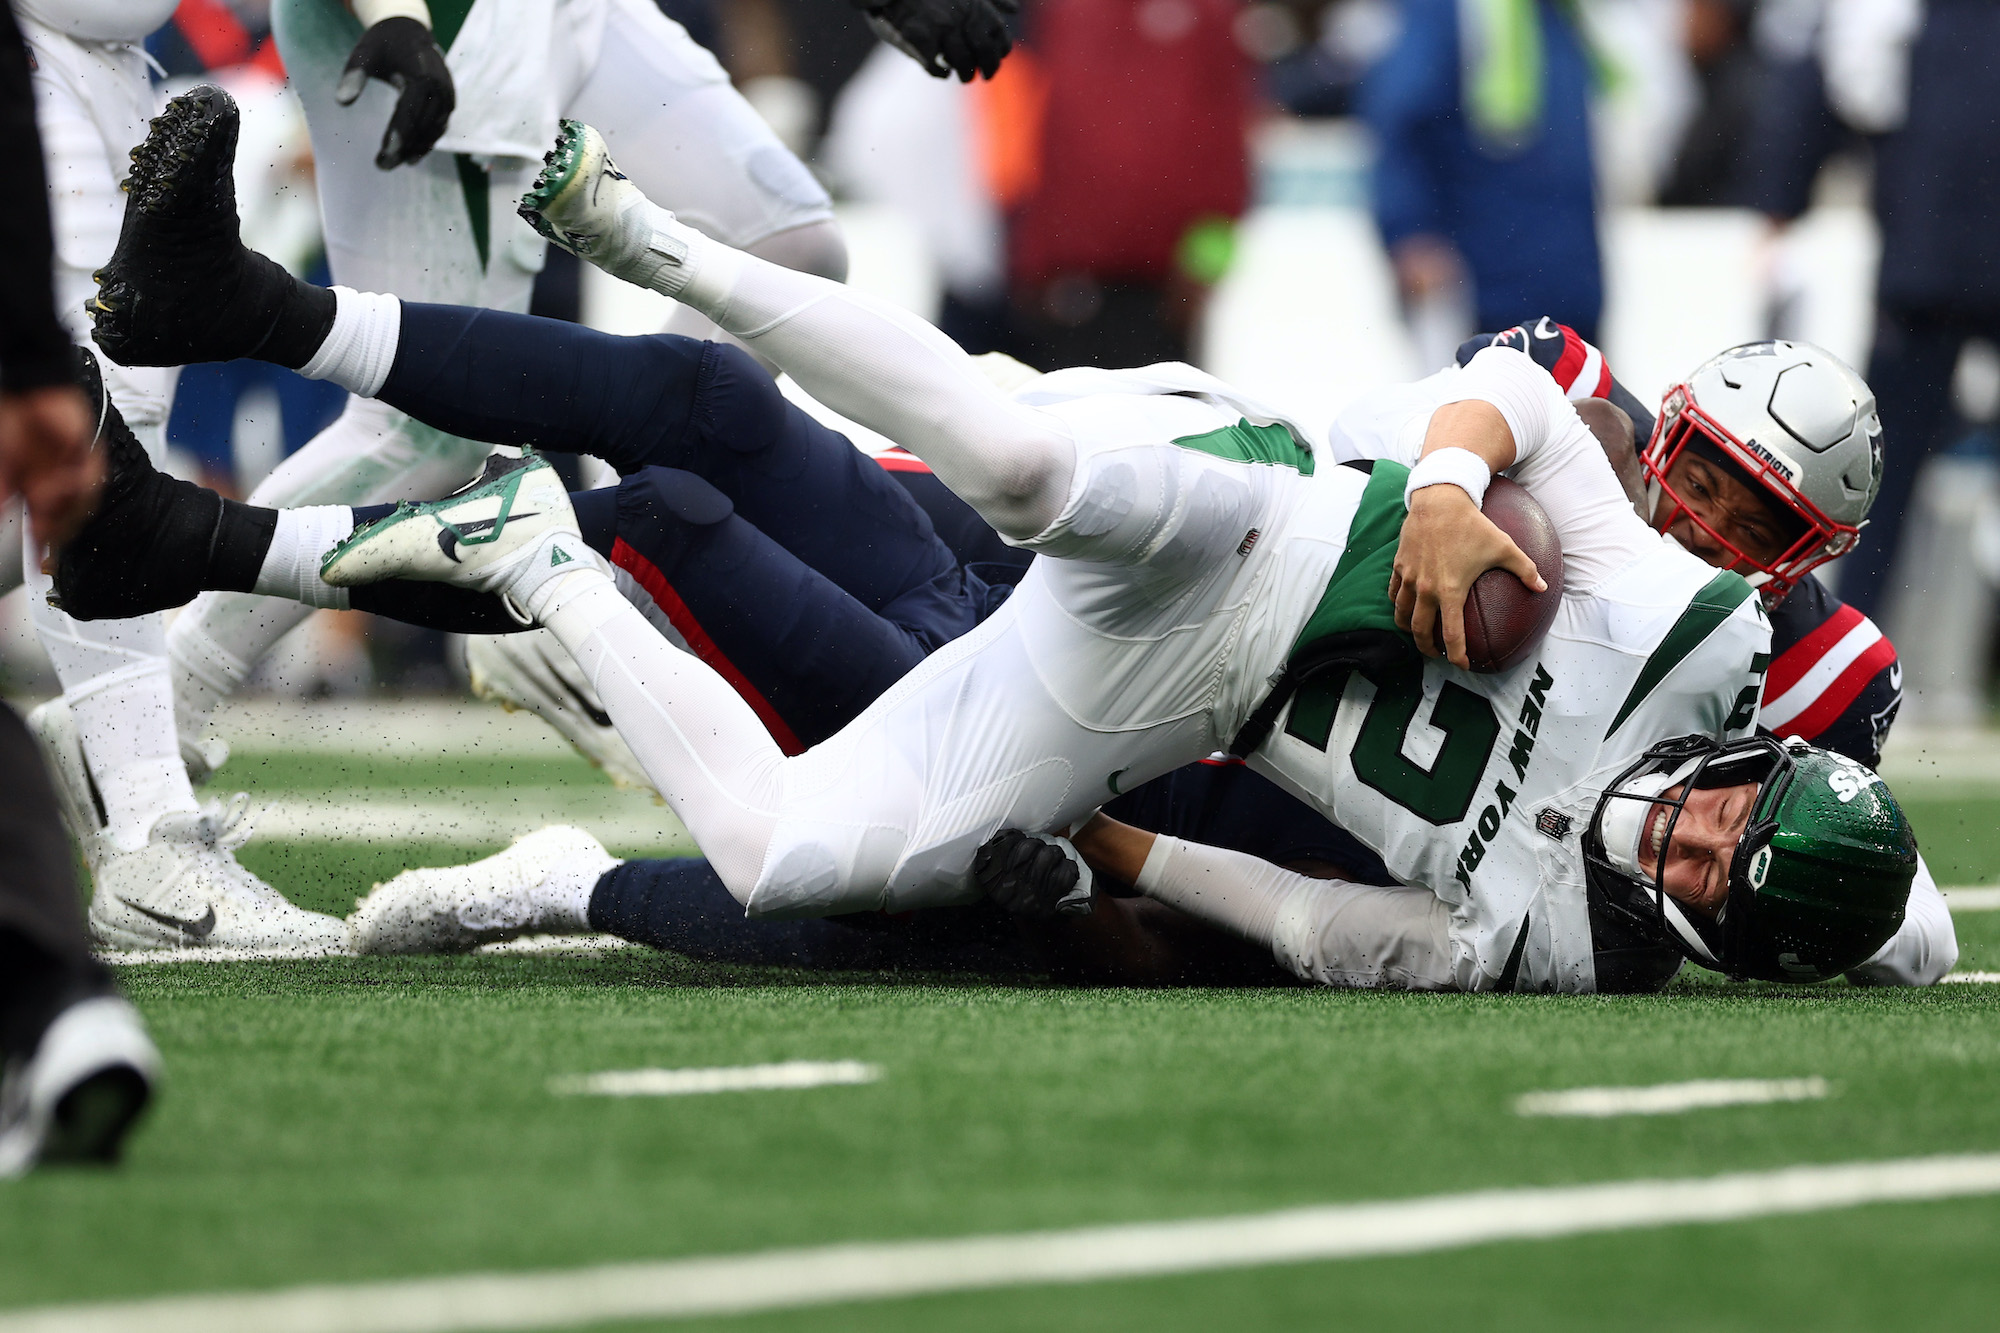 Zach Wilson is sacked during the Patriots-Jets game.